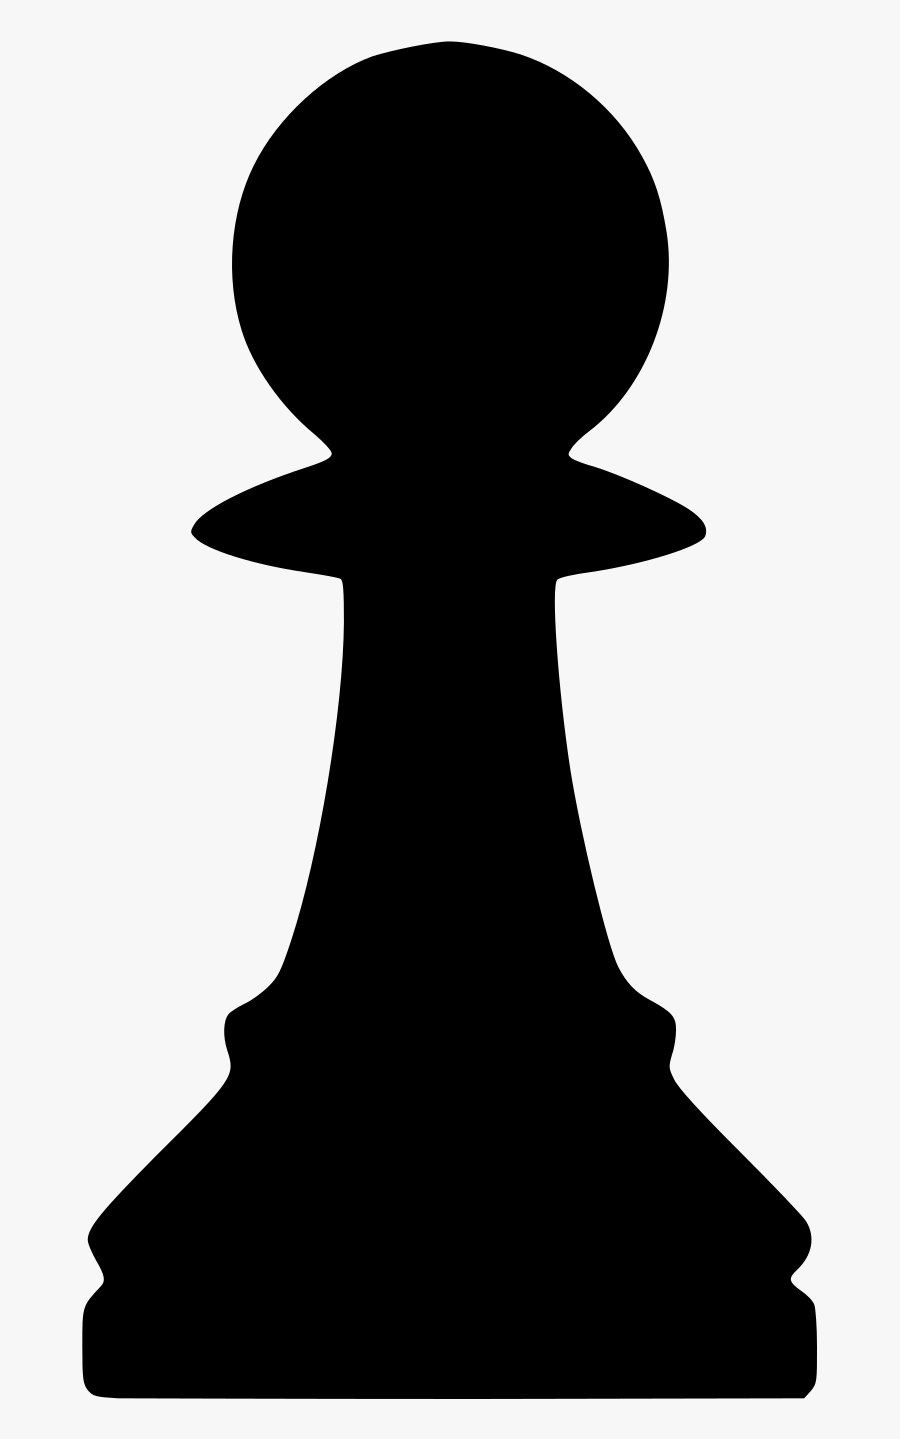 Chess Piece Pawn Knight Clip Art - Chess Pieces Pawn Png, Transparent Clipart